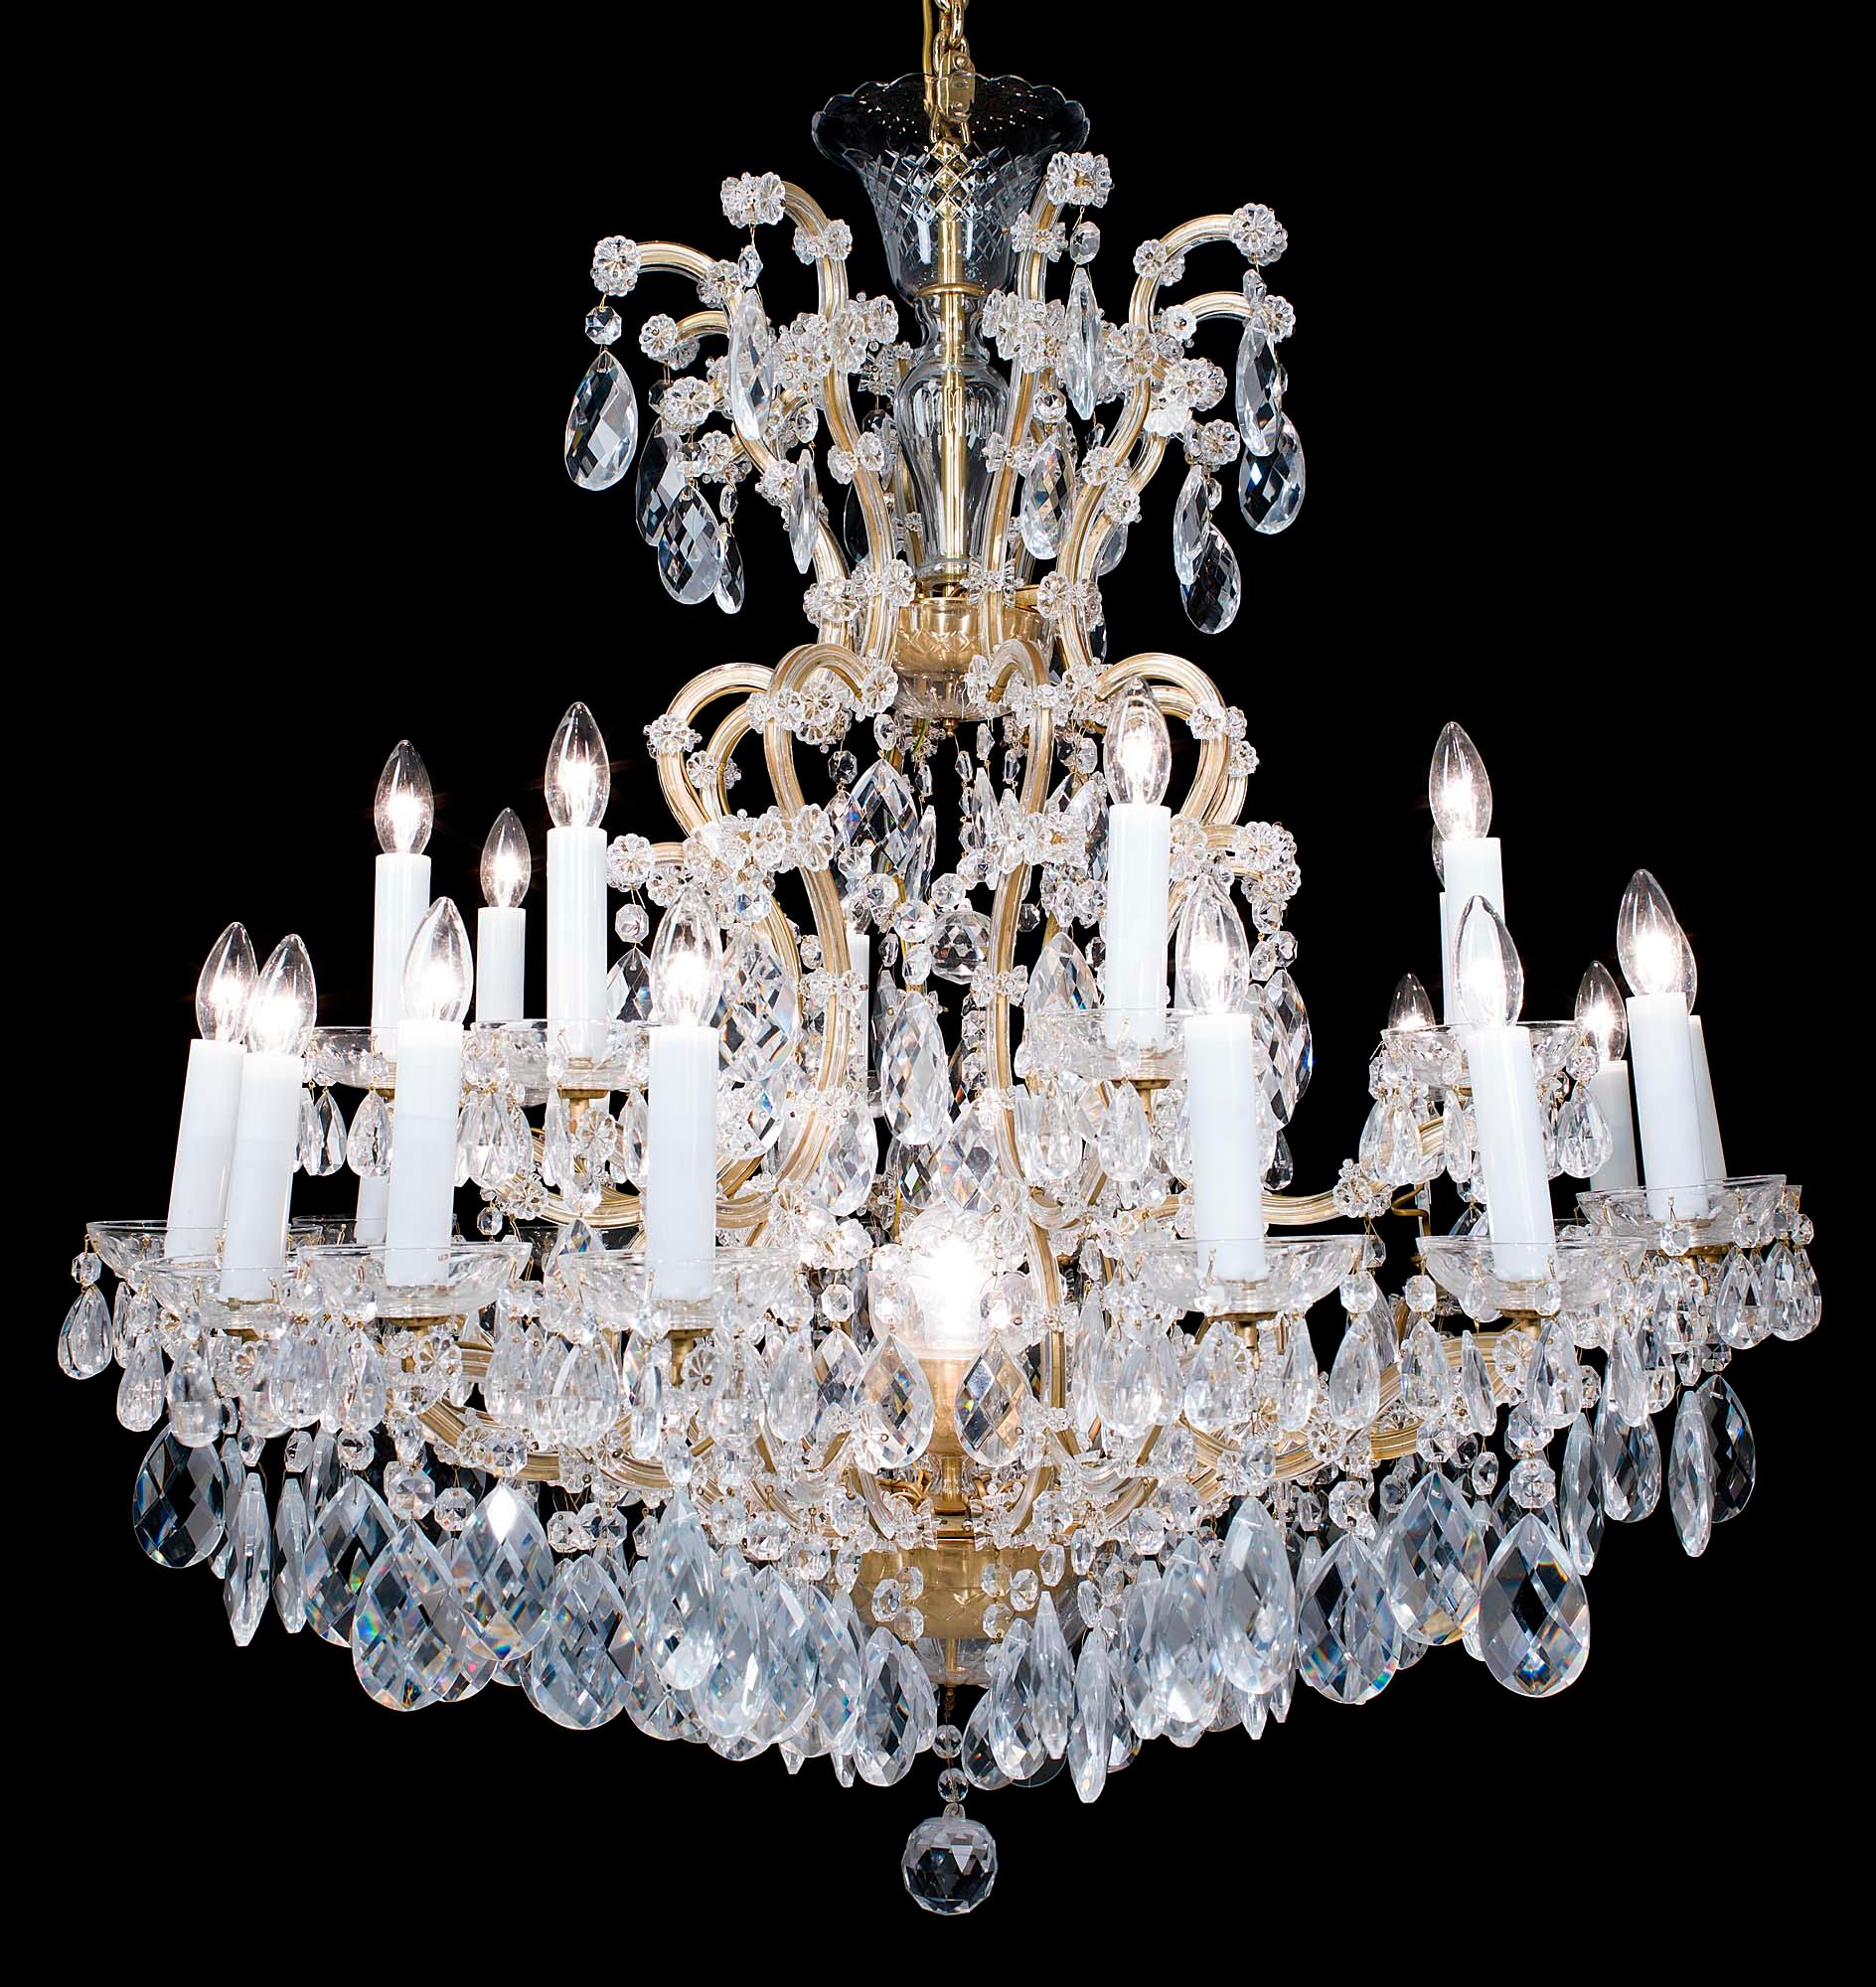 A large two-tier, twenty four light glass and brass 20th century chandelier in the neoclassical style. The upper tier has eight brass scrolling branches the lower with sixteen, all enhanced with multiple florets, issuing from an ornate brass bowl